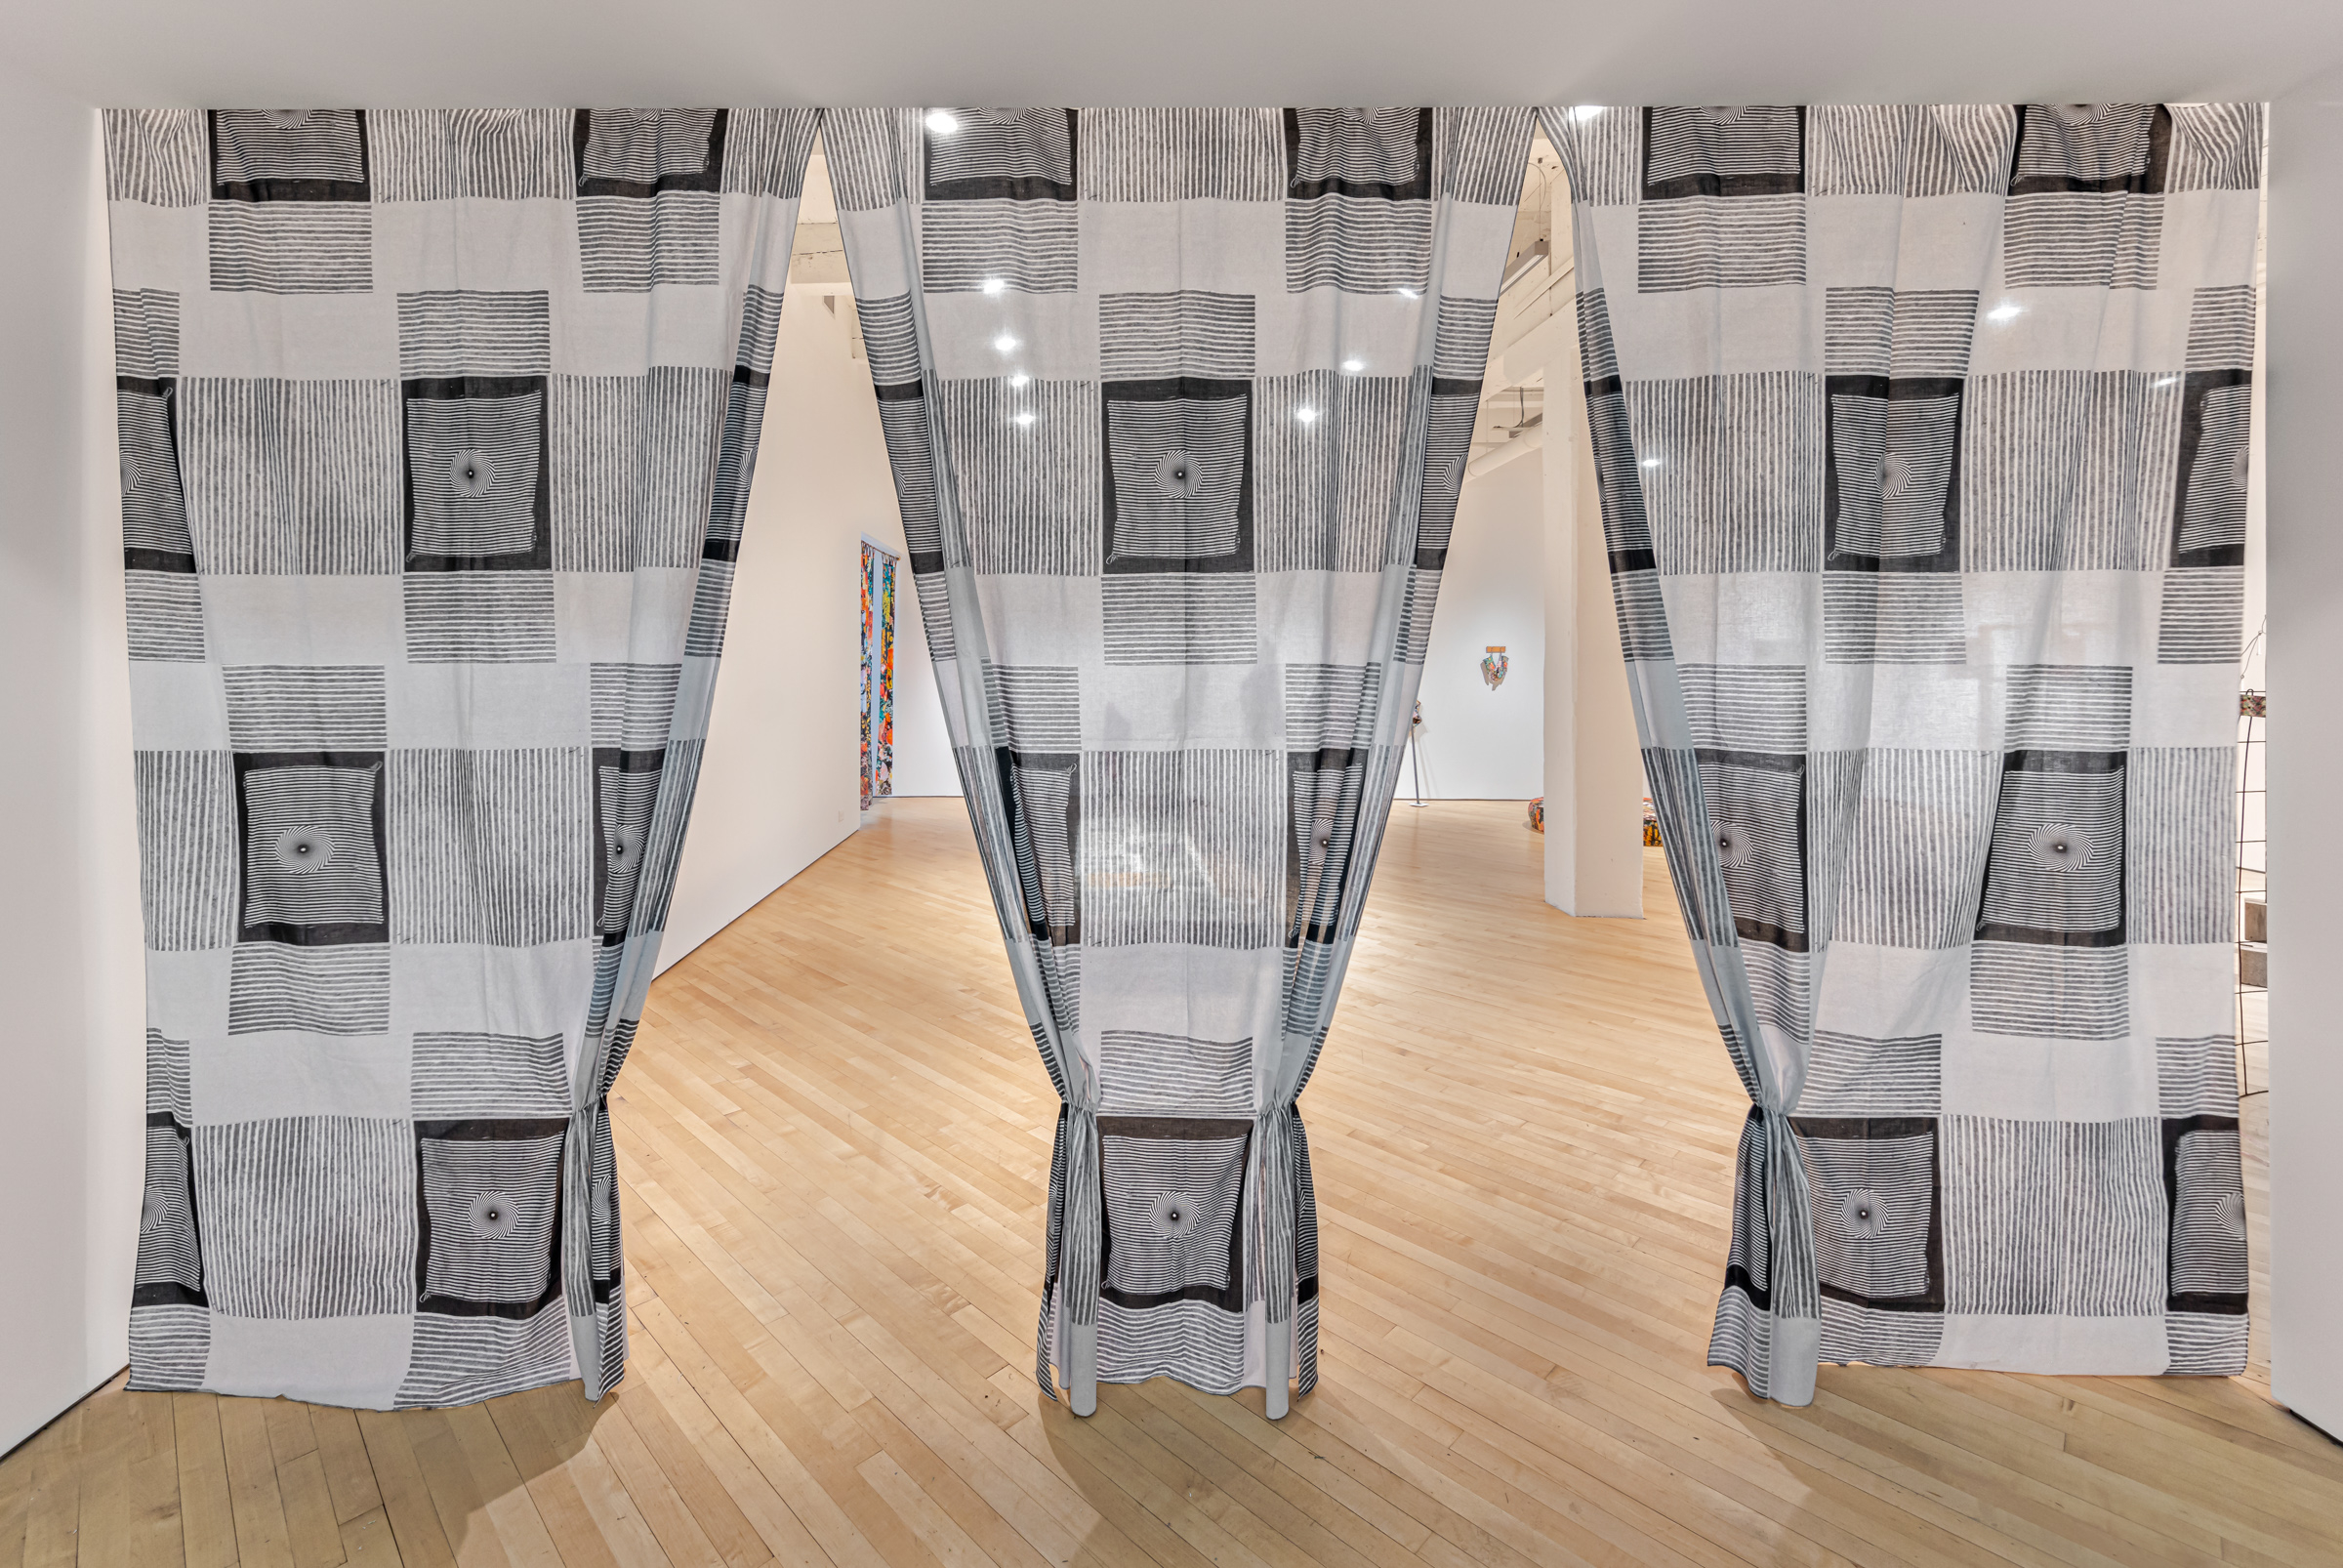     Maggie Groat, DOUBLE PENDULUM, installation view, CONTACT Gallery, 2023. Courtesy of the artist and Scotiabank CONTACT Photography Festival. Photo: Toni Hafkenscheid

